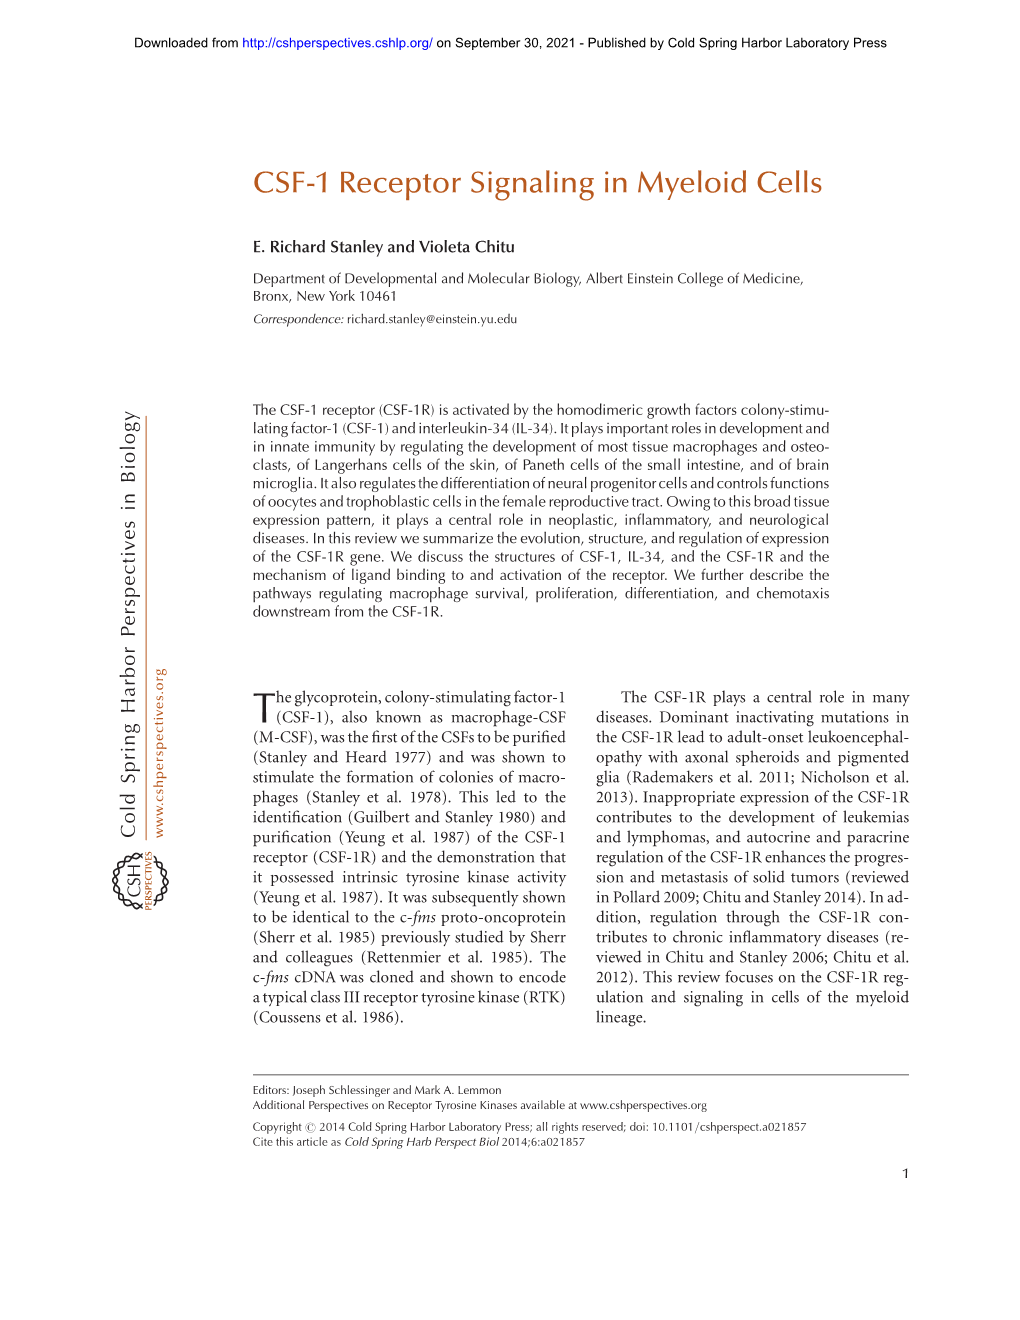 CSF-1 Receptor Signaling in Myeloid Cells